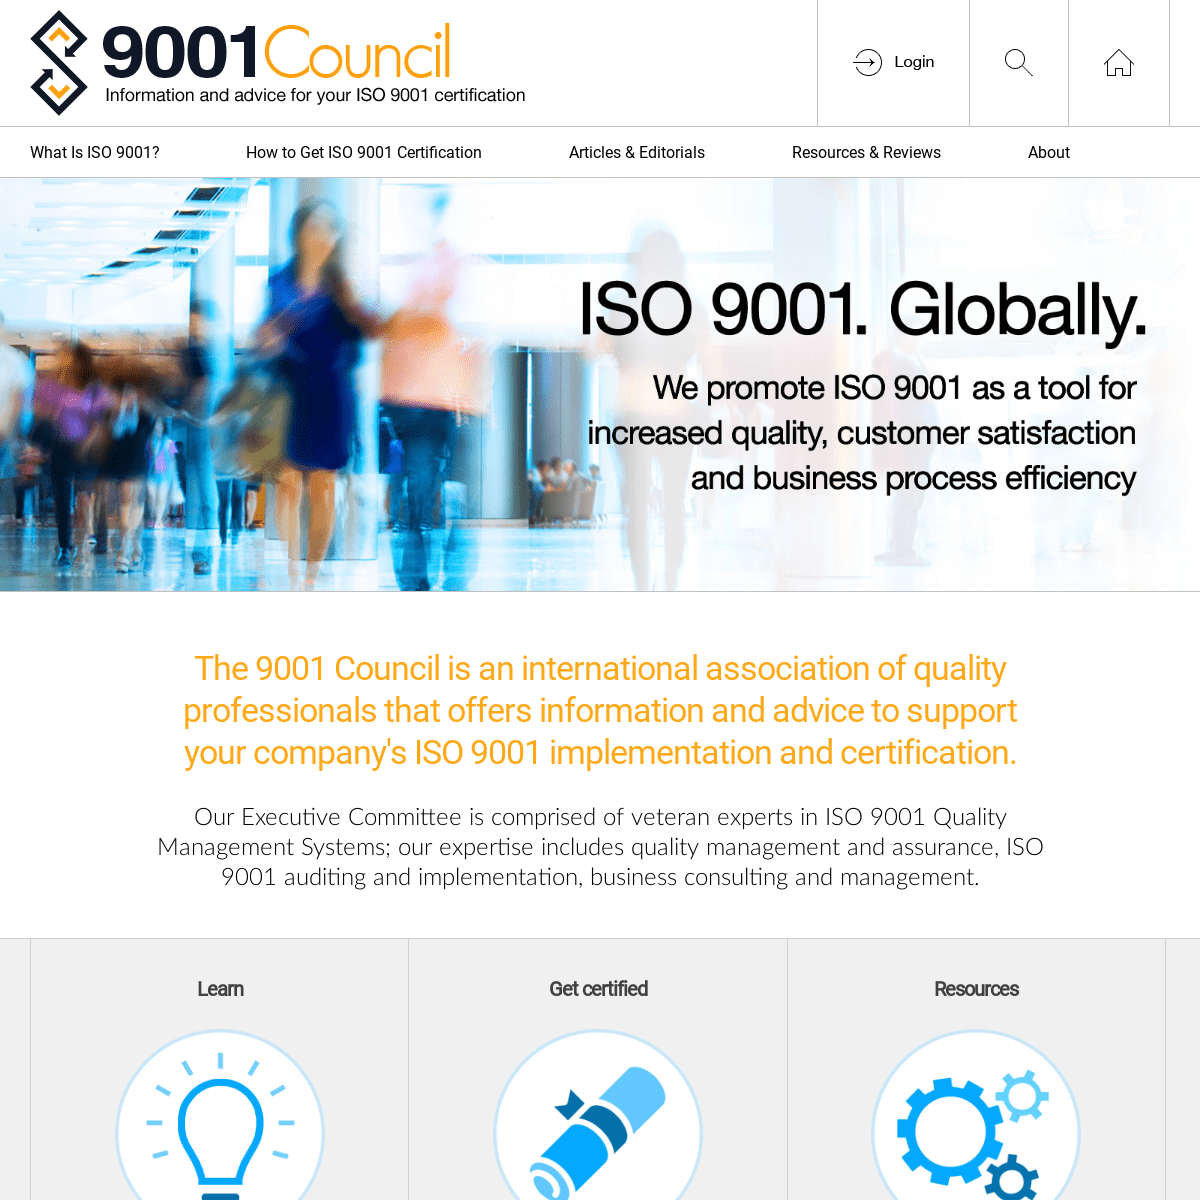 The 9001 Council